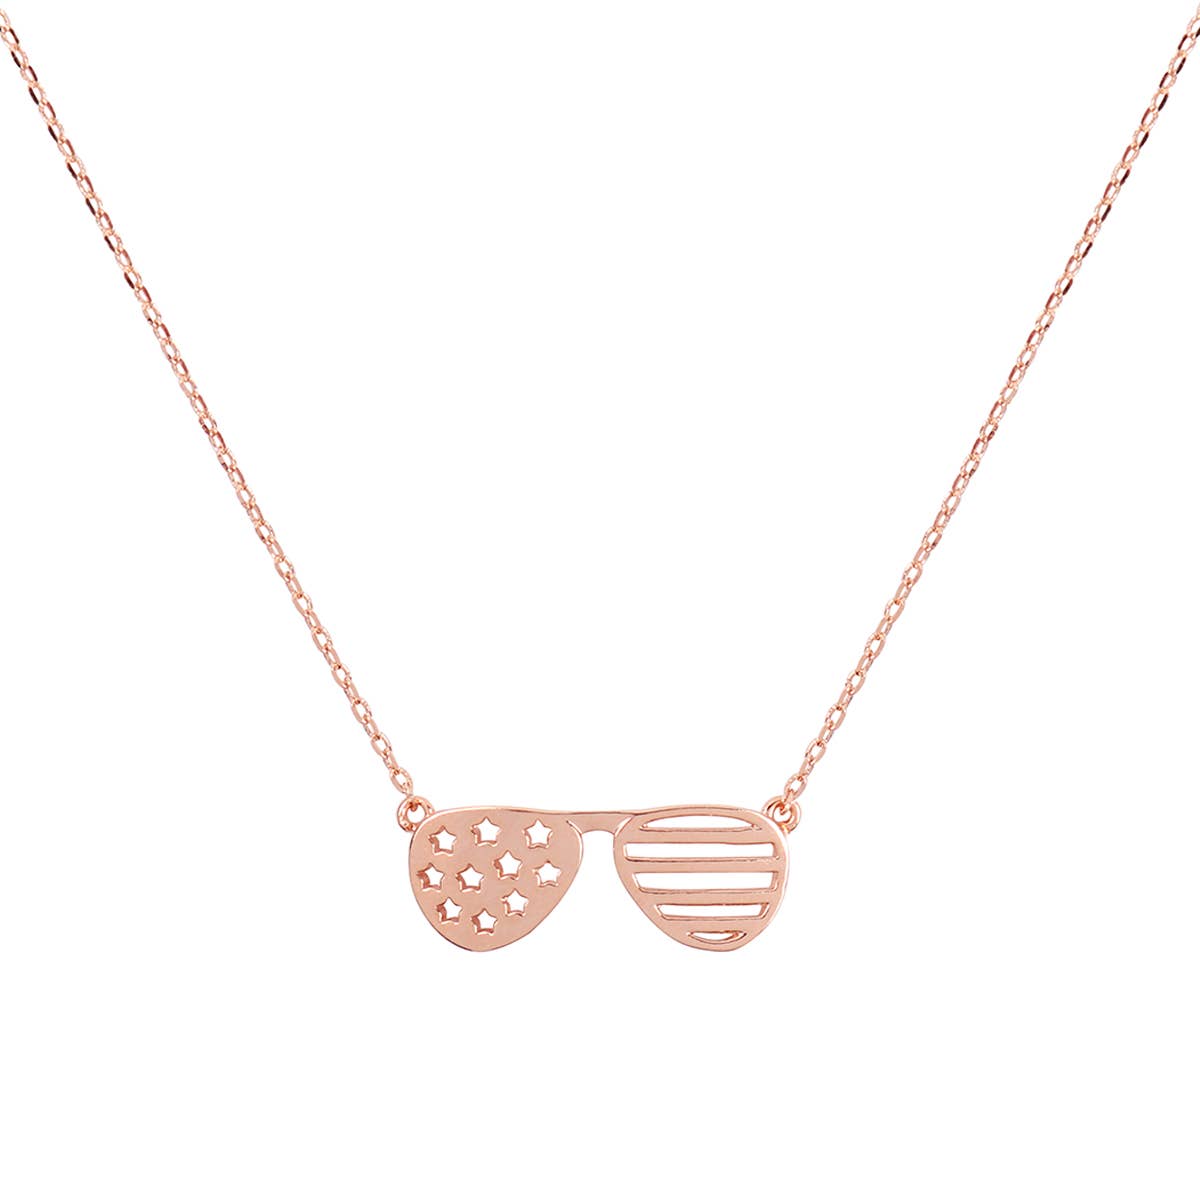 American Flag Sunglasses Necklace